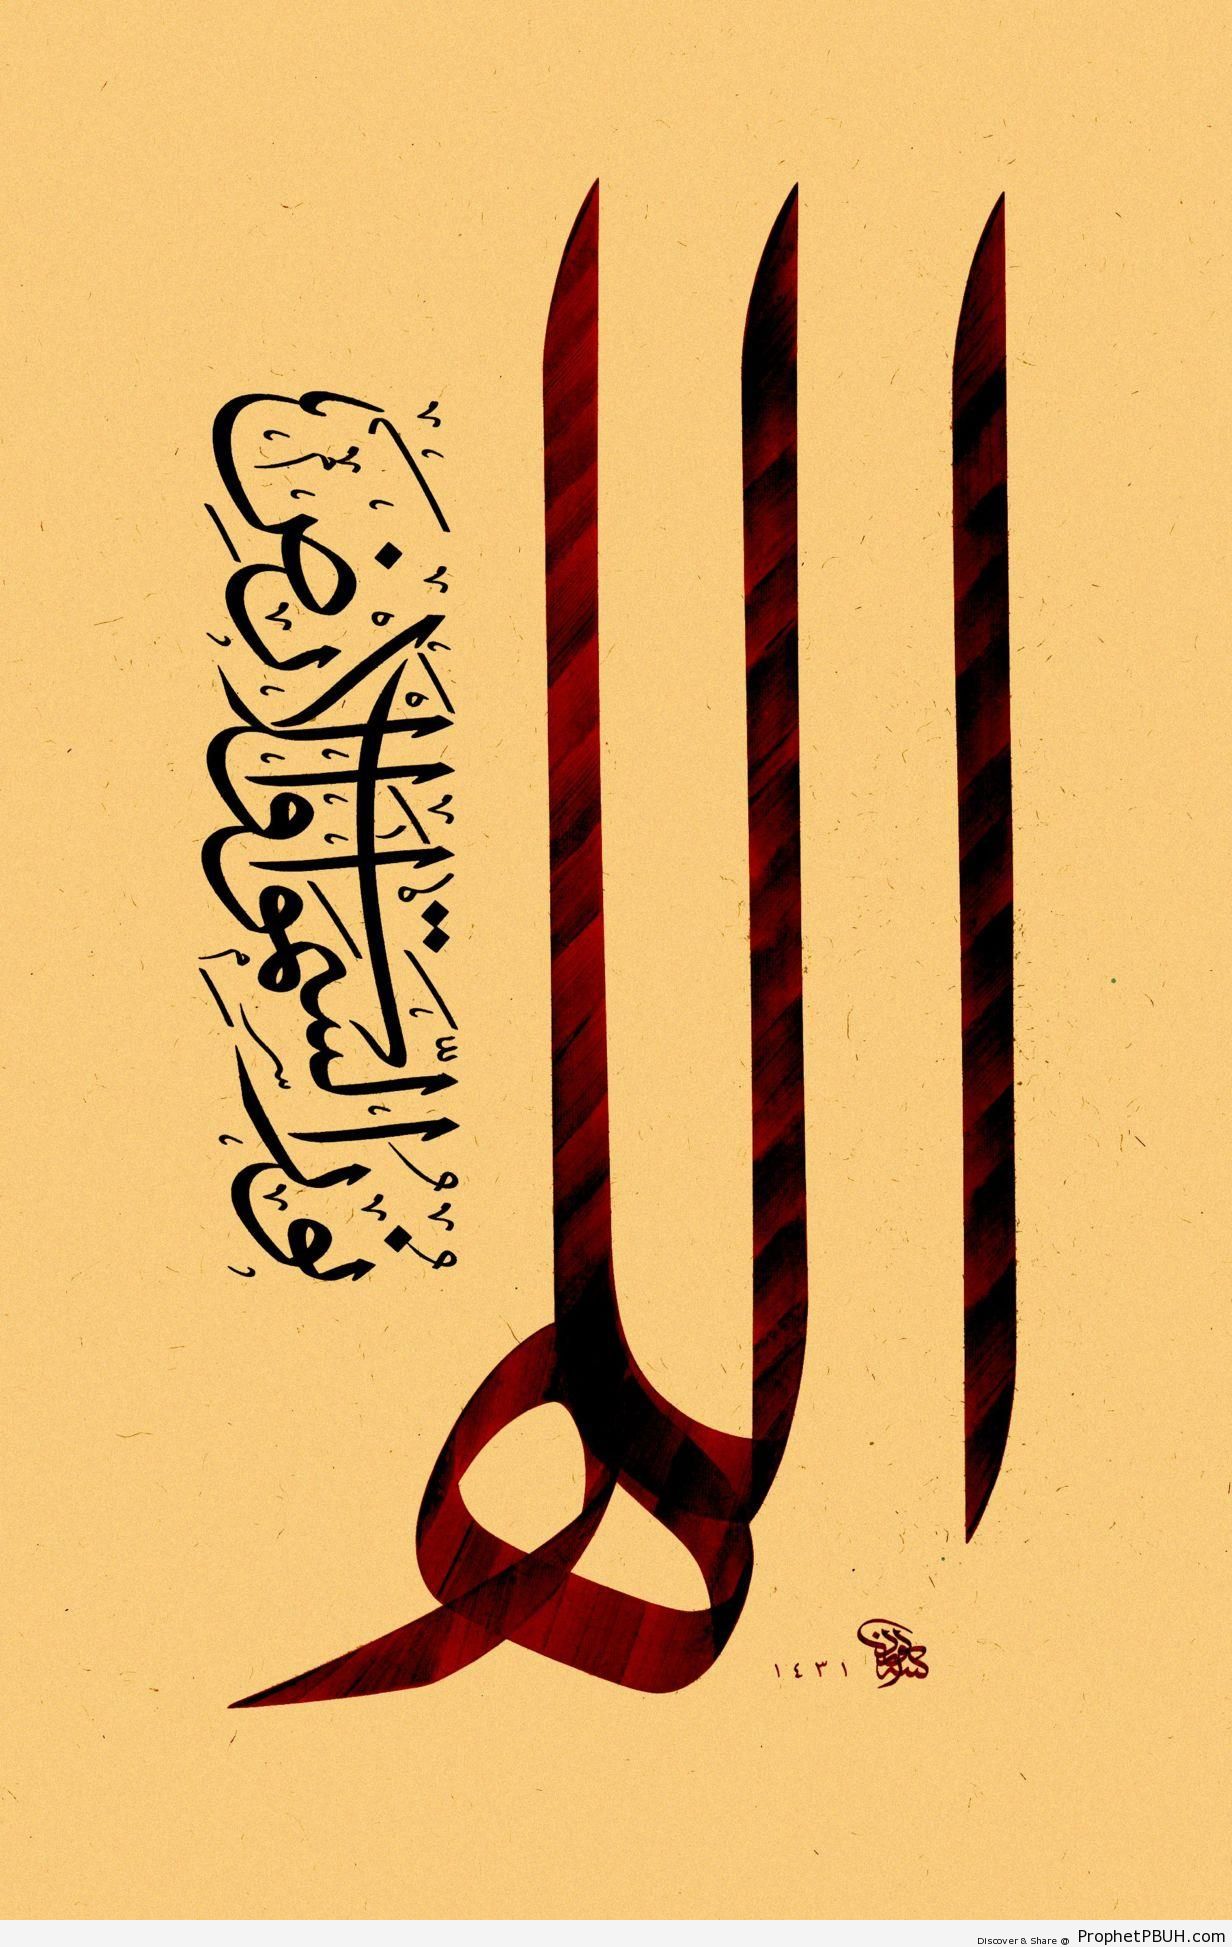 Allah is the Light (Quran 24-35) - Islamic Calligraphy and Typography 